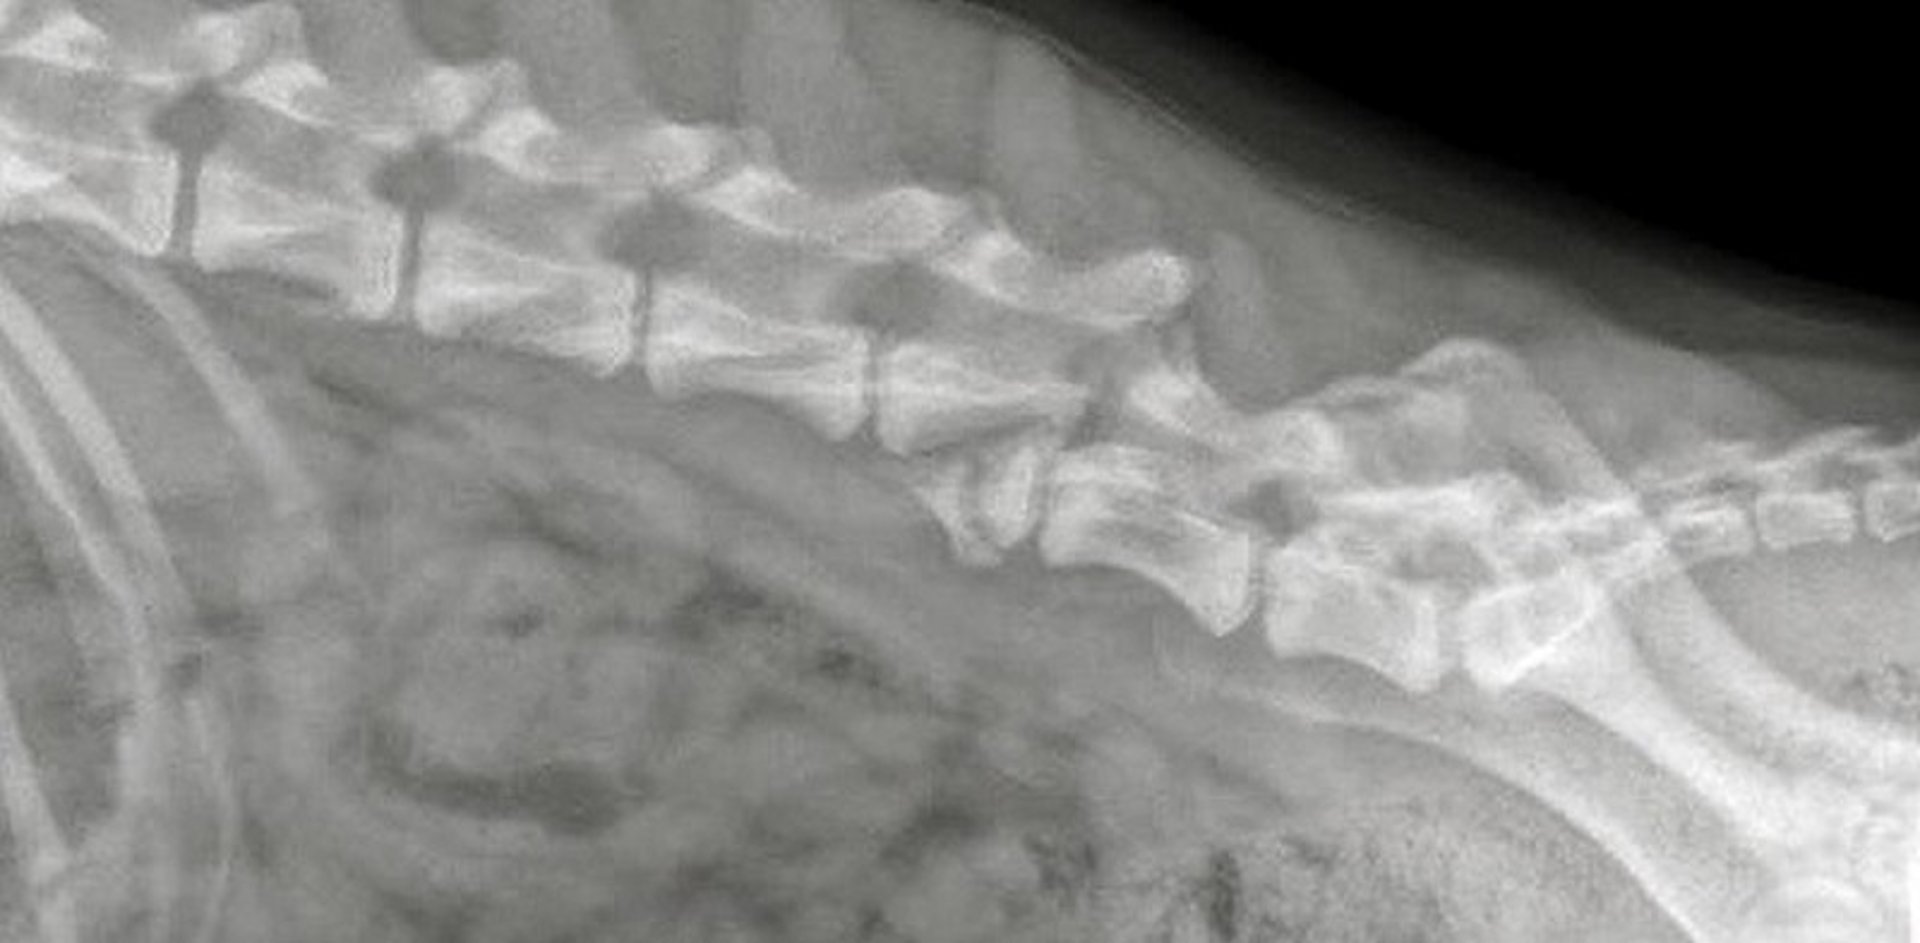 L5 fracture and L5-L6 luxation, dog